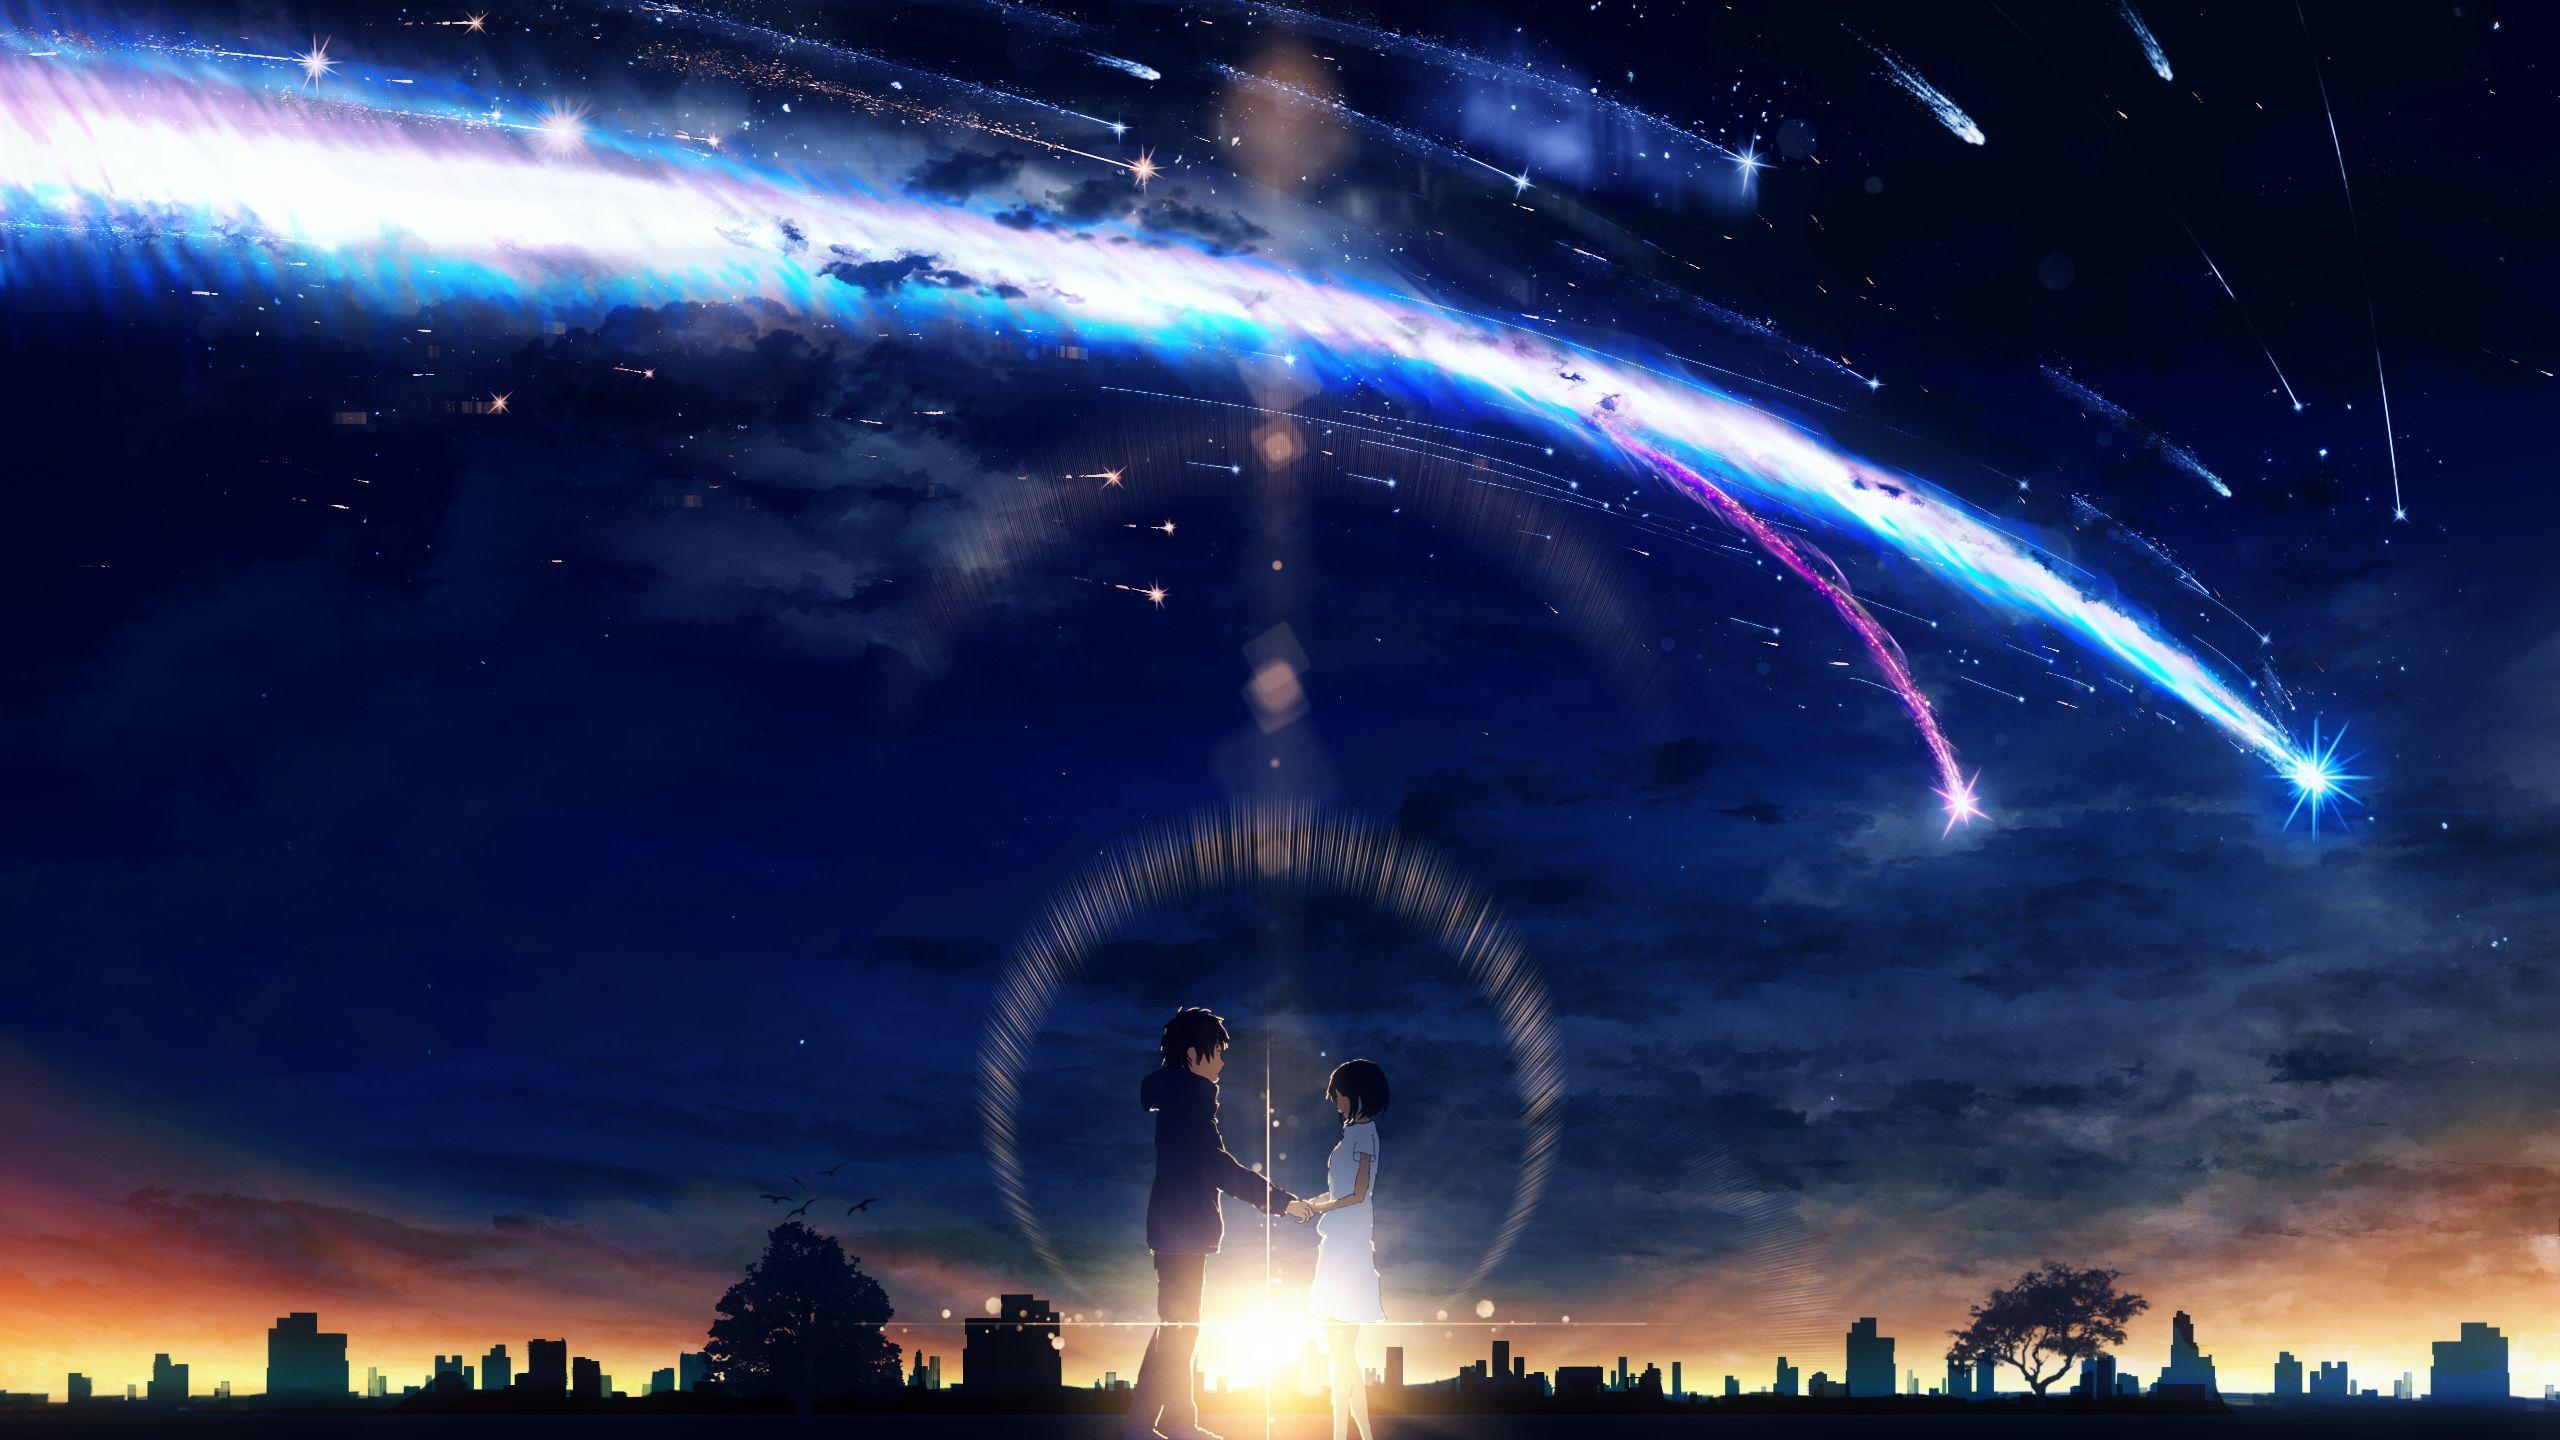 Your Name Anime Wallpapers Top Free Your Name Anime Backgrounds